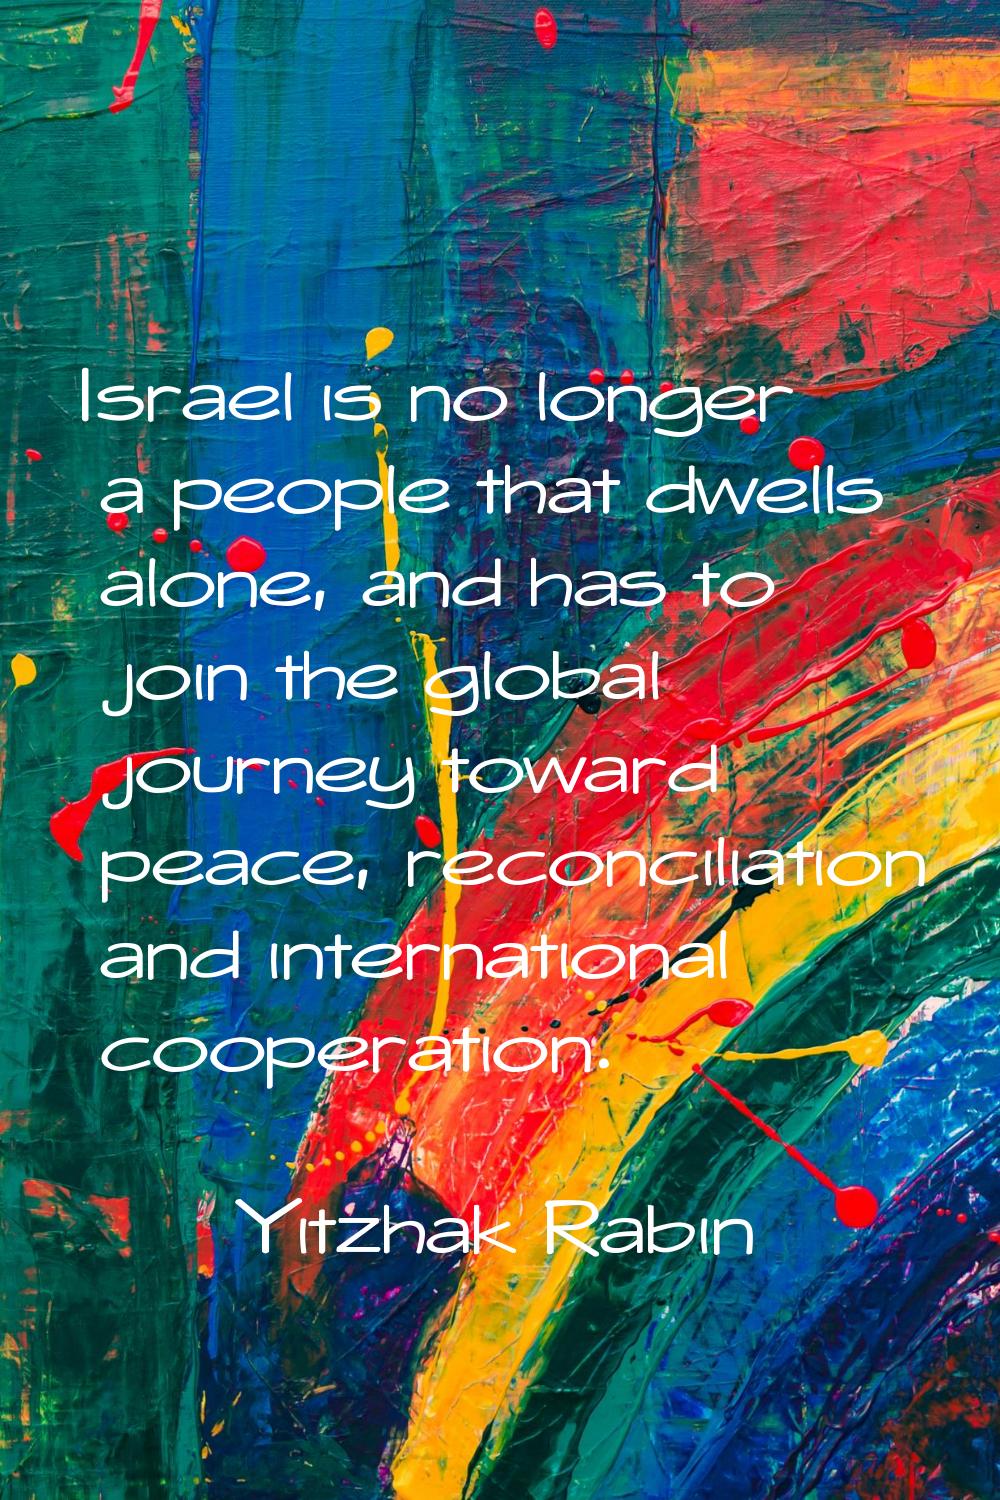 Israel is no longer a people that dwells alone, and has to join the global journey toward peace, re